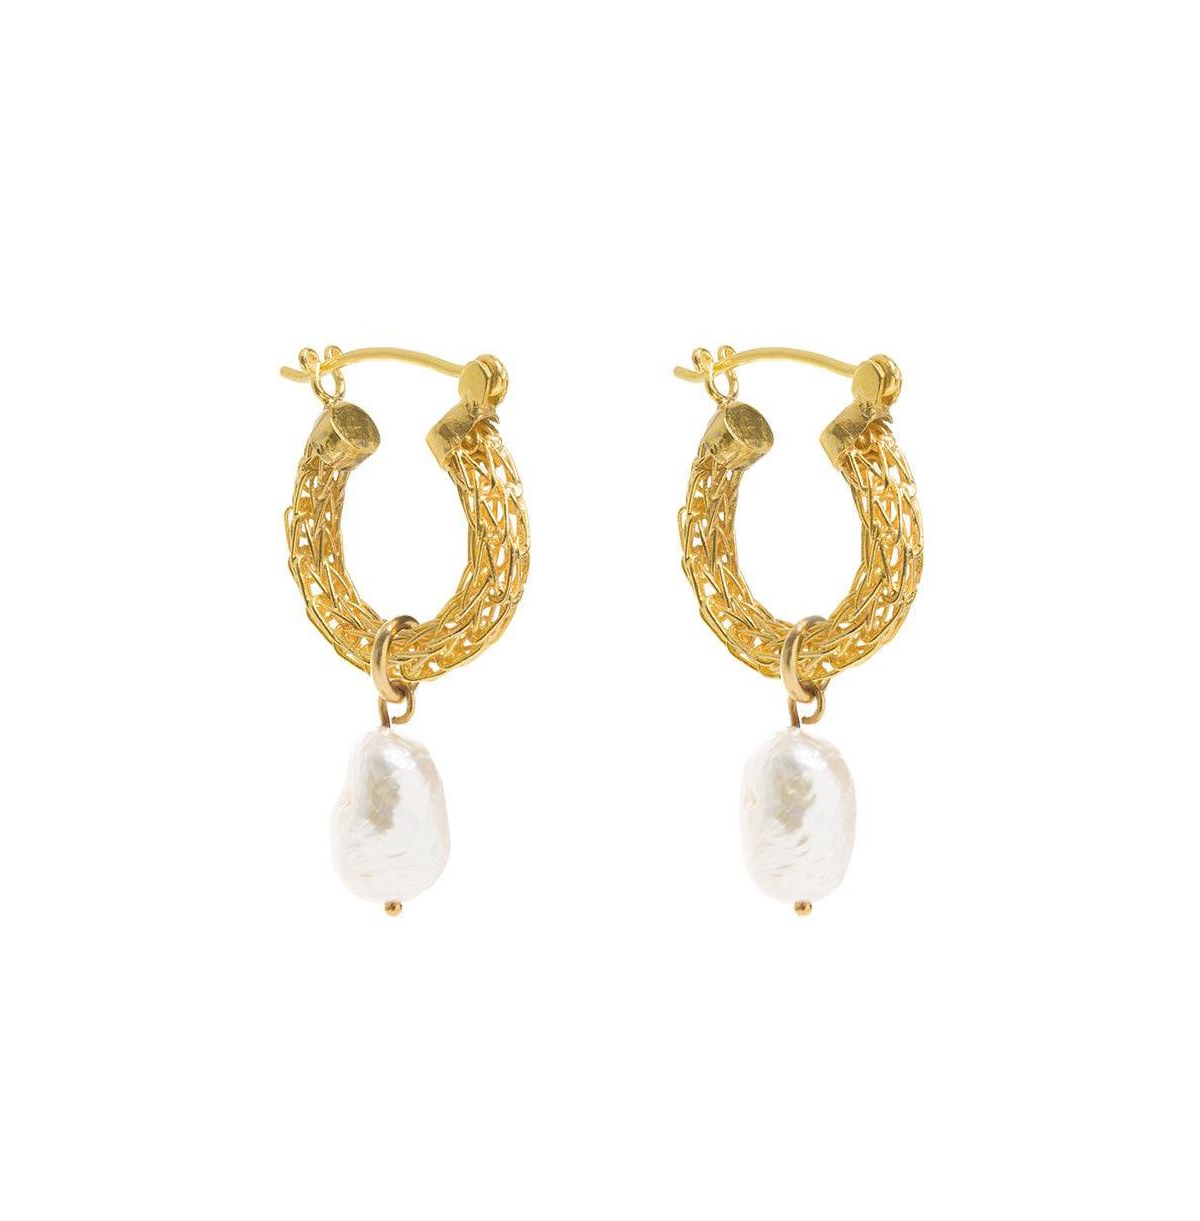 Gold Weave Mini Hoops With Baroque Pearl Earrings - Gold